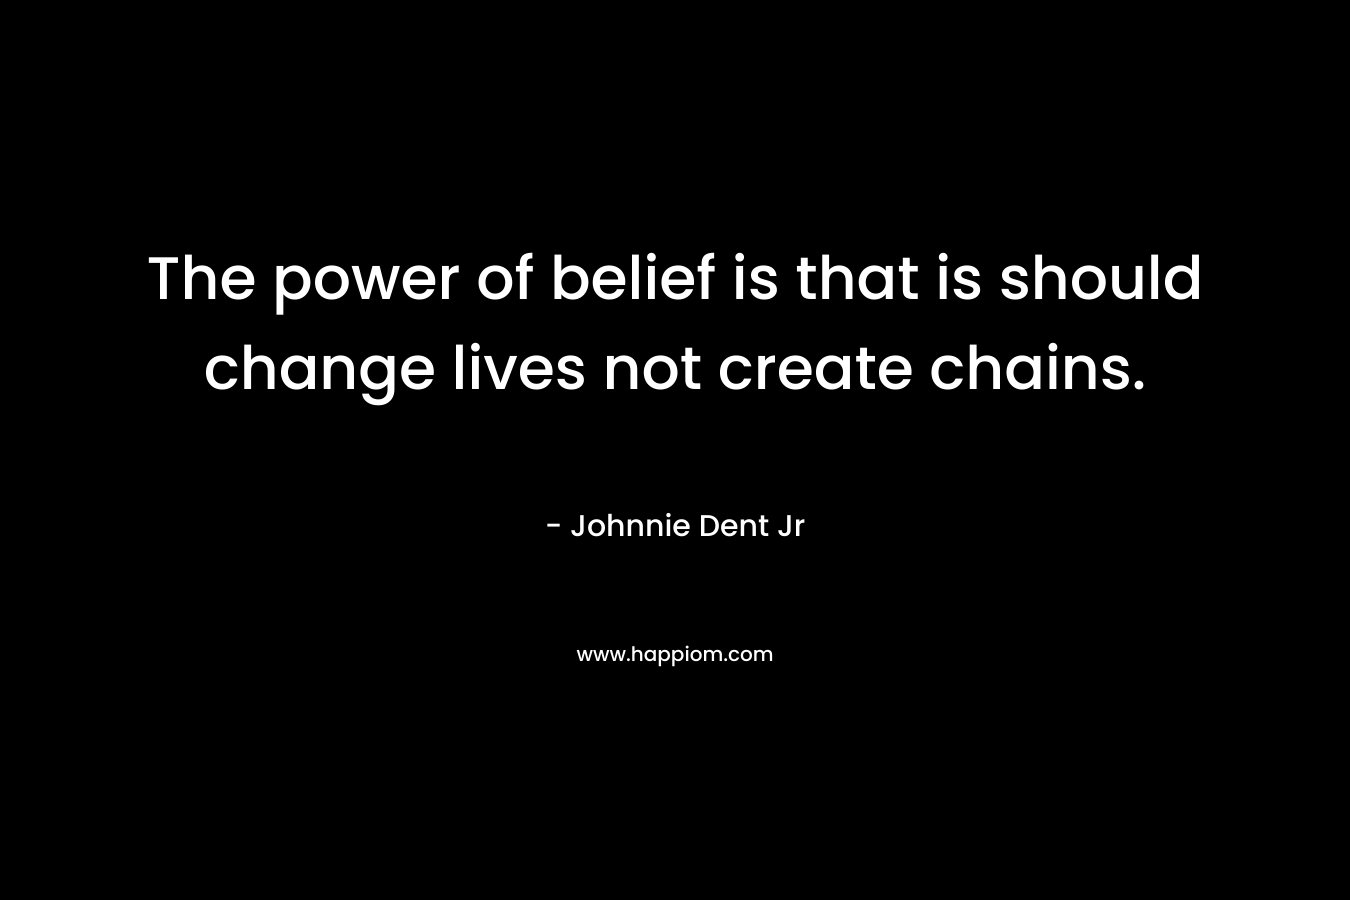 The power of belief is that is should change lives not create chains.